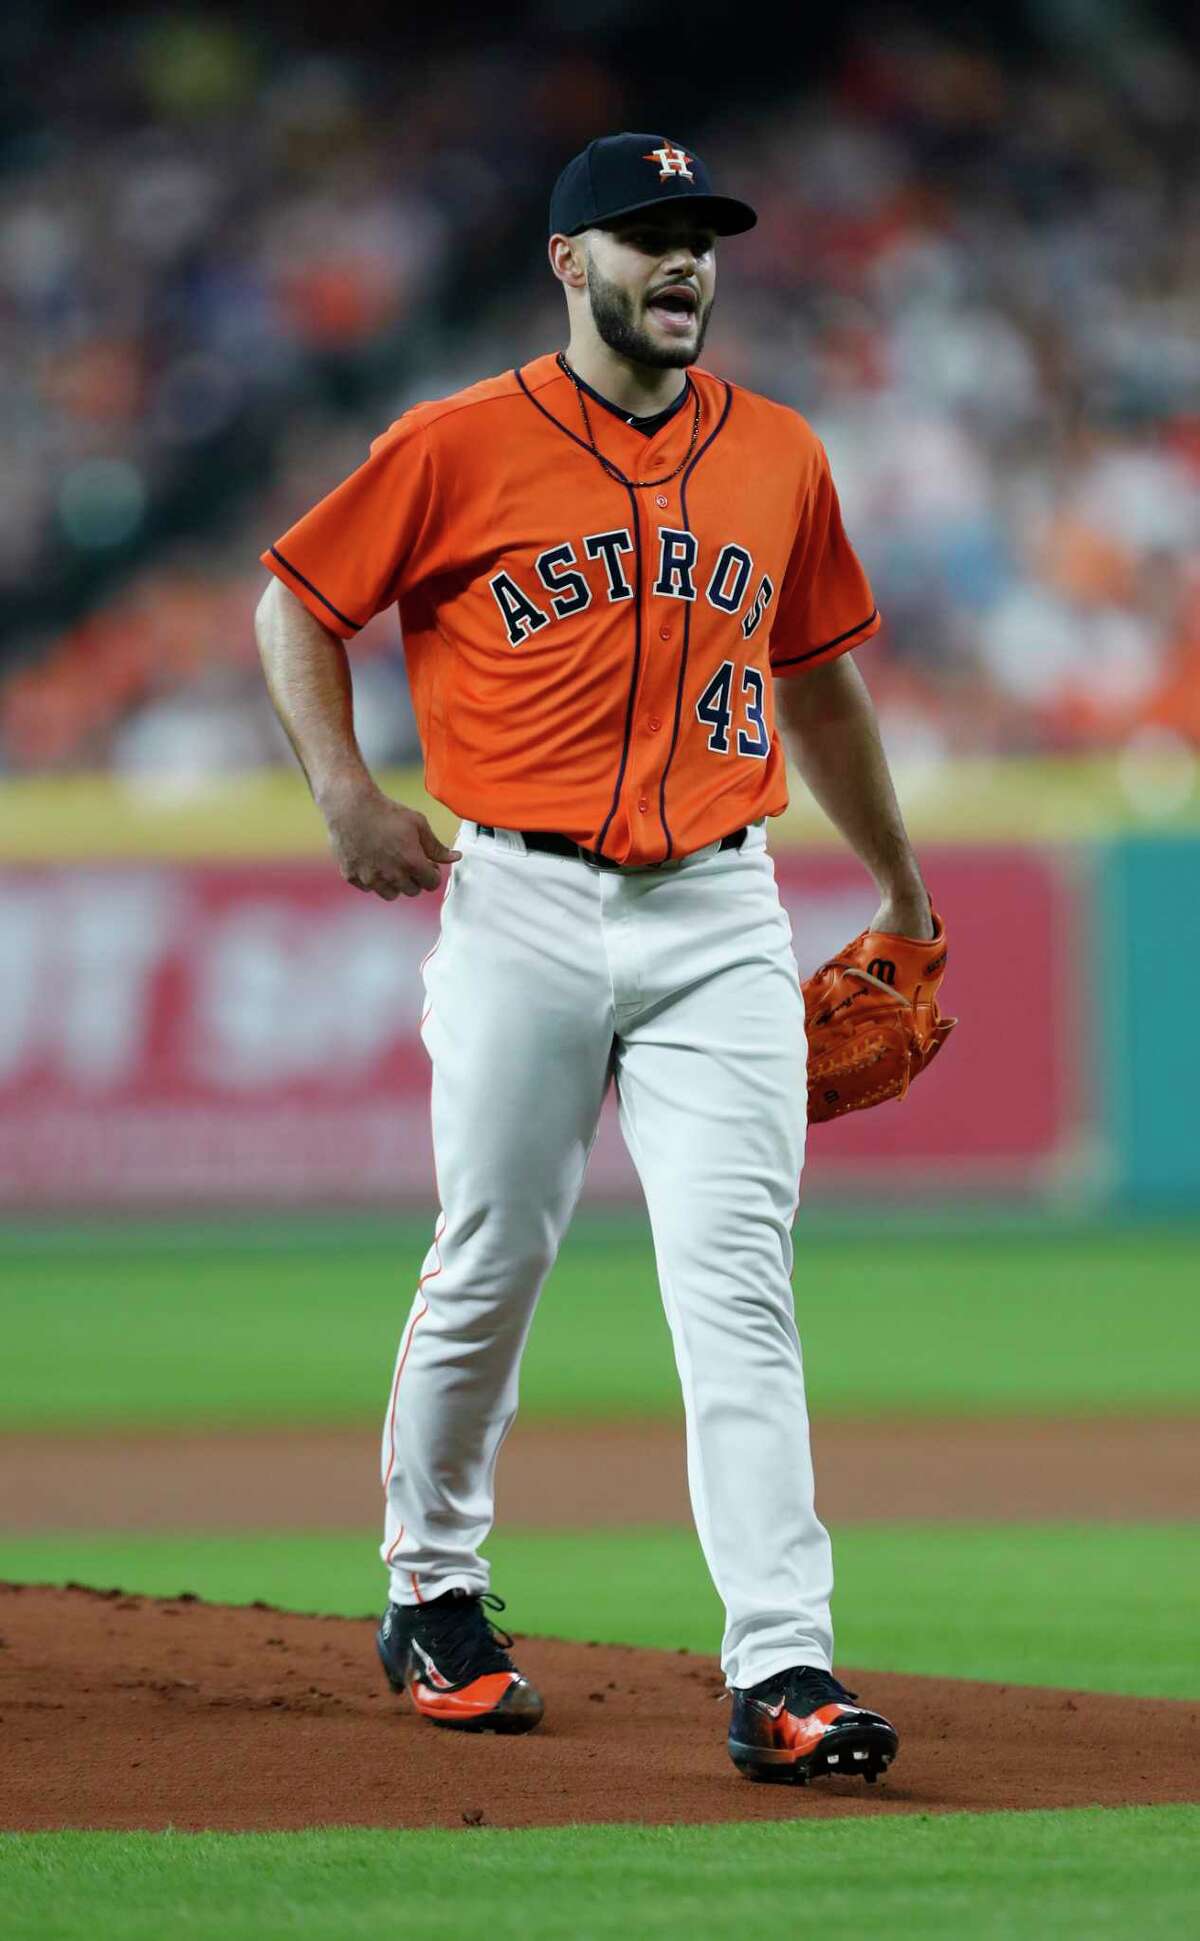 Among the Astros' priorities over the season's final eight weeks is making sure Lance McCullers Jr. is healthy enough to re-gain his All-Star form.